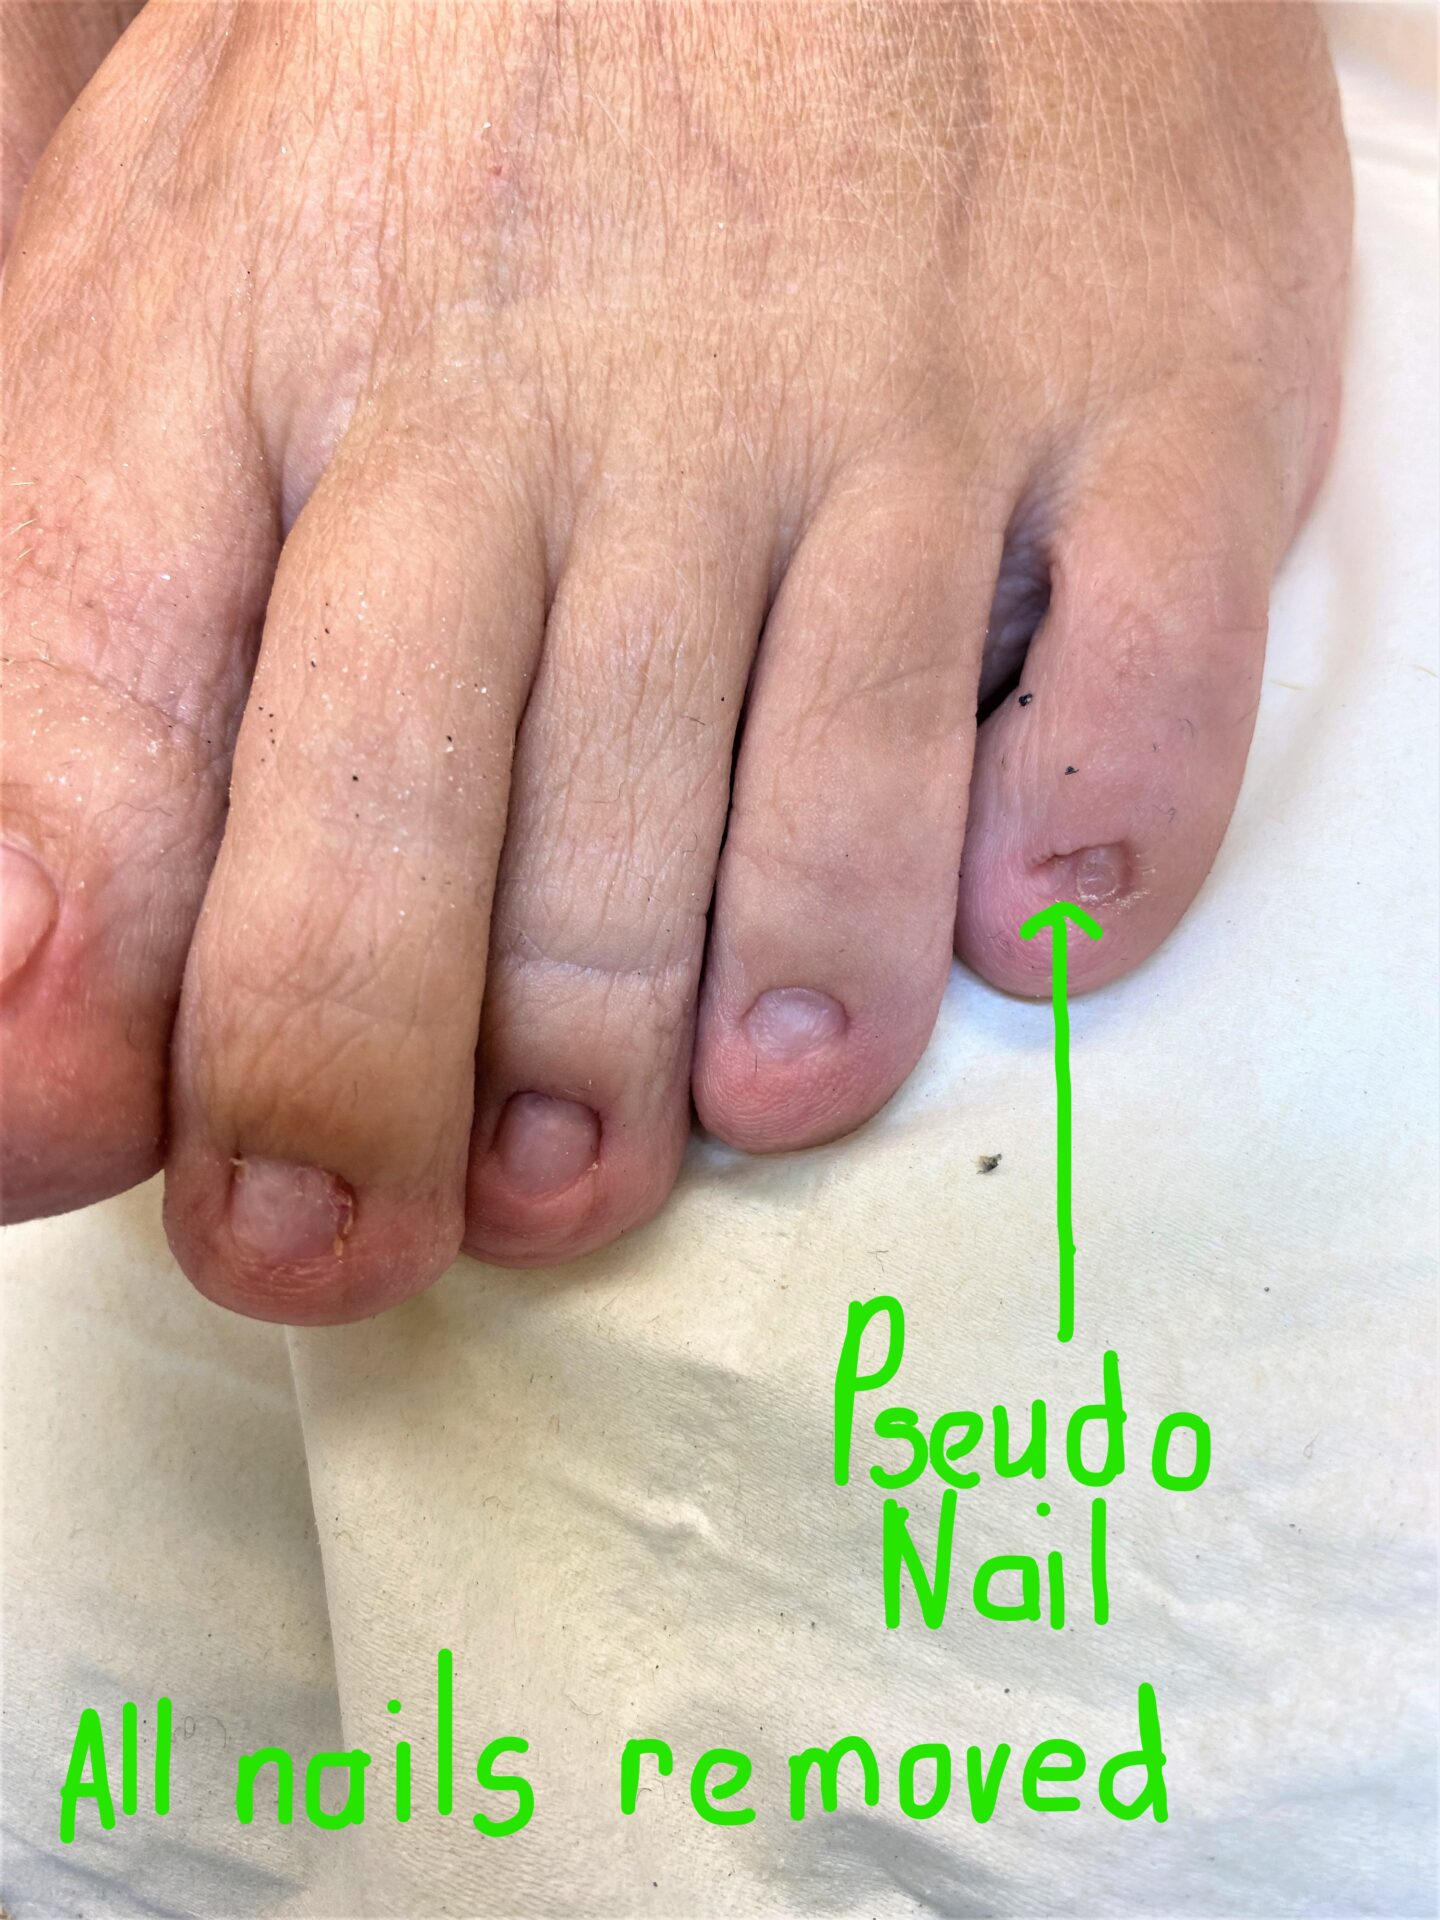 How to Treat a Broken Toe - A Podiatrists' Guide